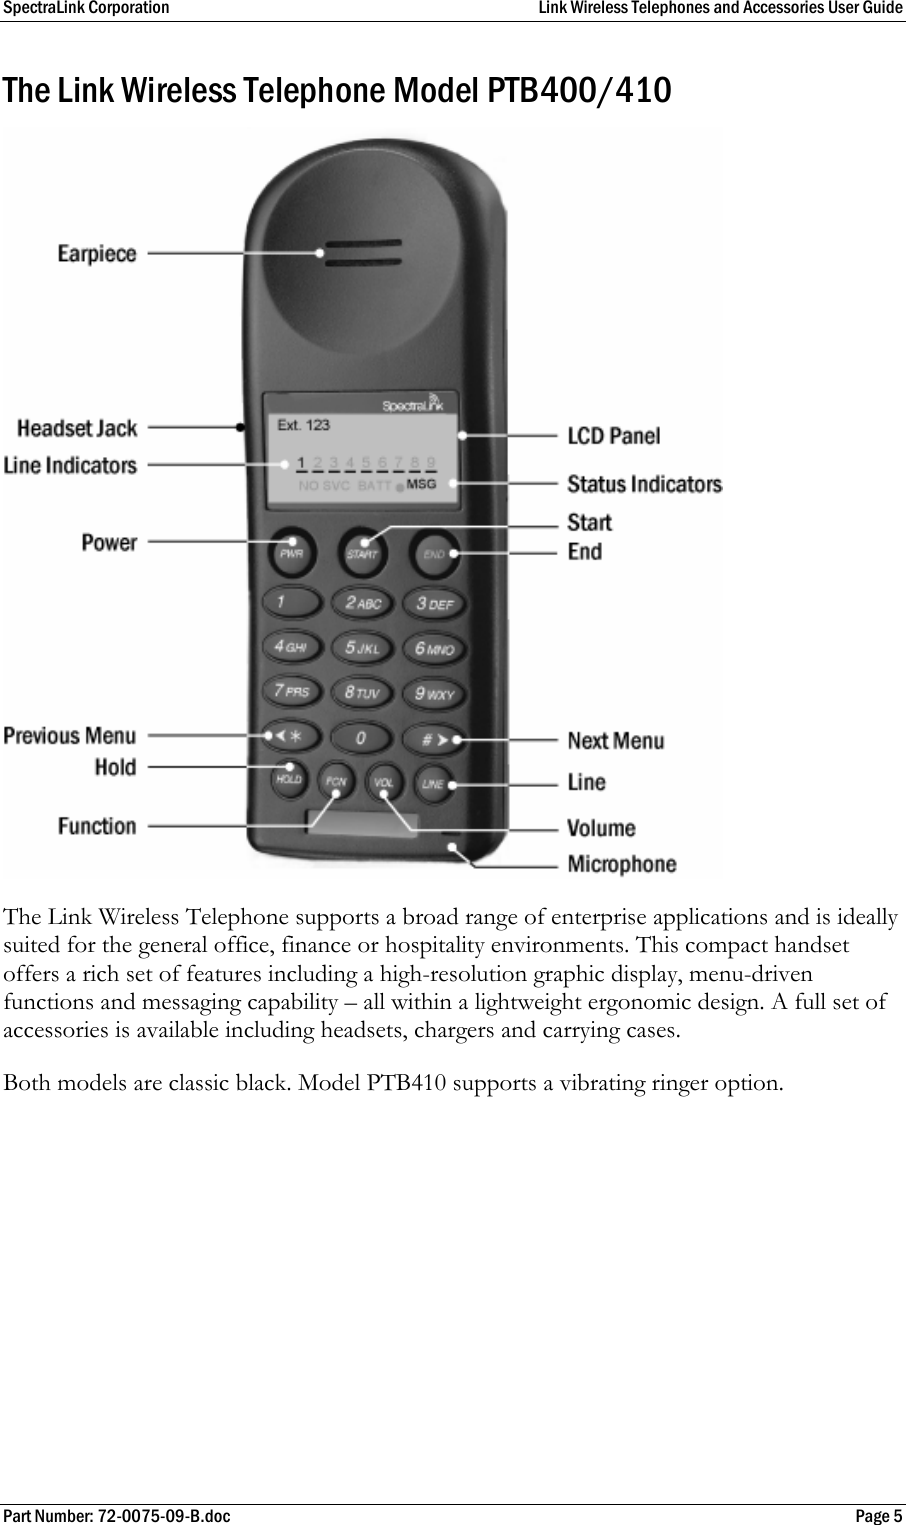 SpectraLink Corporation  Link Wireless Telephones and Accessories User Guide Part Number: 72-0075-09-B.doc  Page 5 The Link Wireless Telephone Model PTB400/410 The Link Wireless Telephone supports a broad range of enterprise applications and is ideally suited for the general office, finance or hospitality environments. This compact handset offers a rich set of features including a high-resolution graphic display, menu-driven functions and messaging capability – all within a lightweight ergonomic design. A full set of accessories is available including headsets, chargers and carrying cases. Both models are classic black. Model PTB410 supports a vibrating ringer option. 